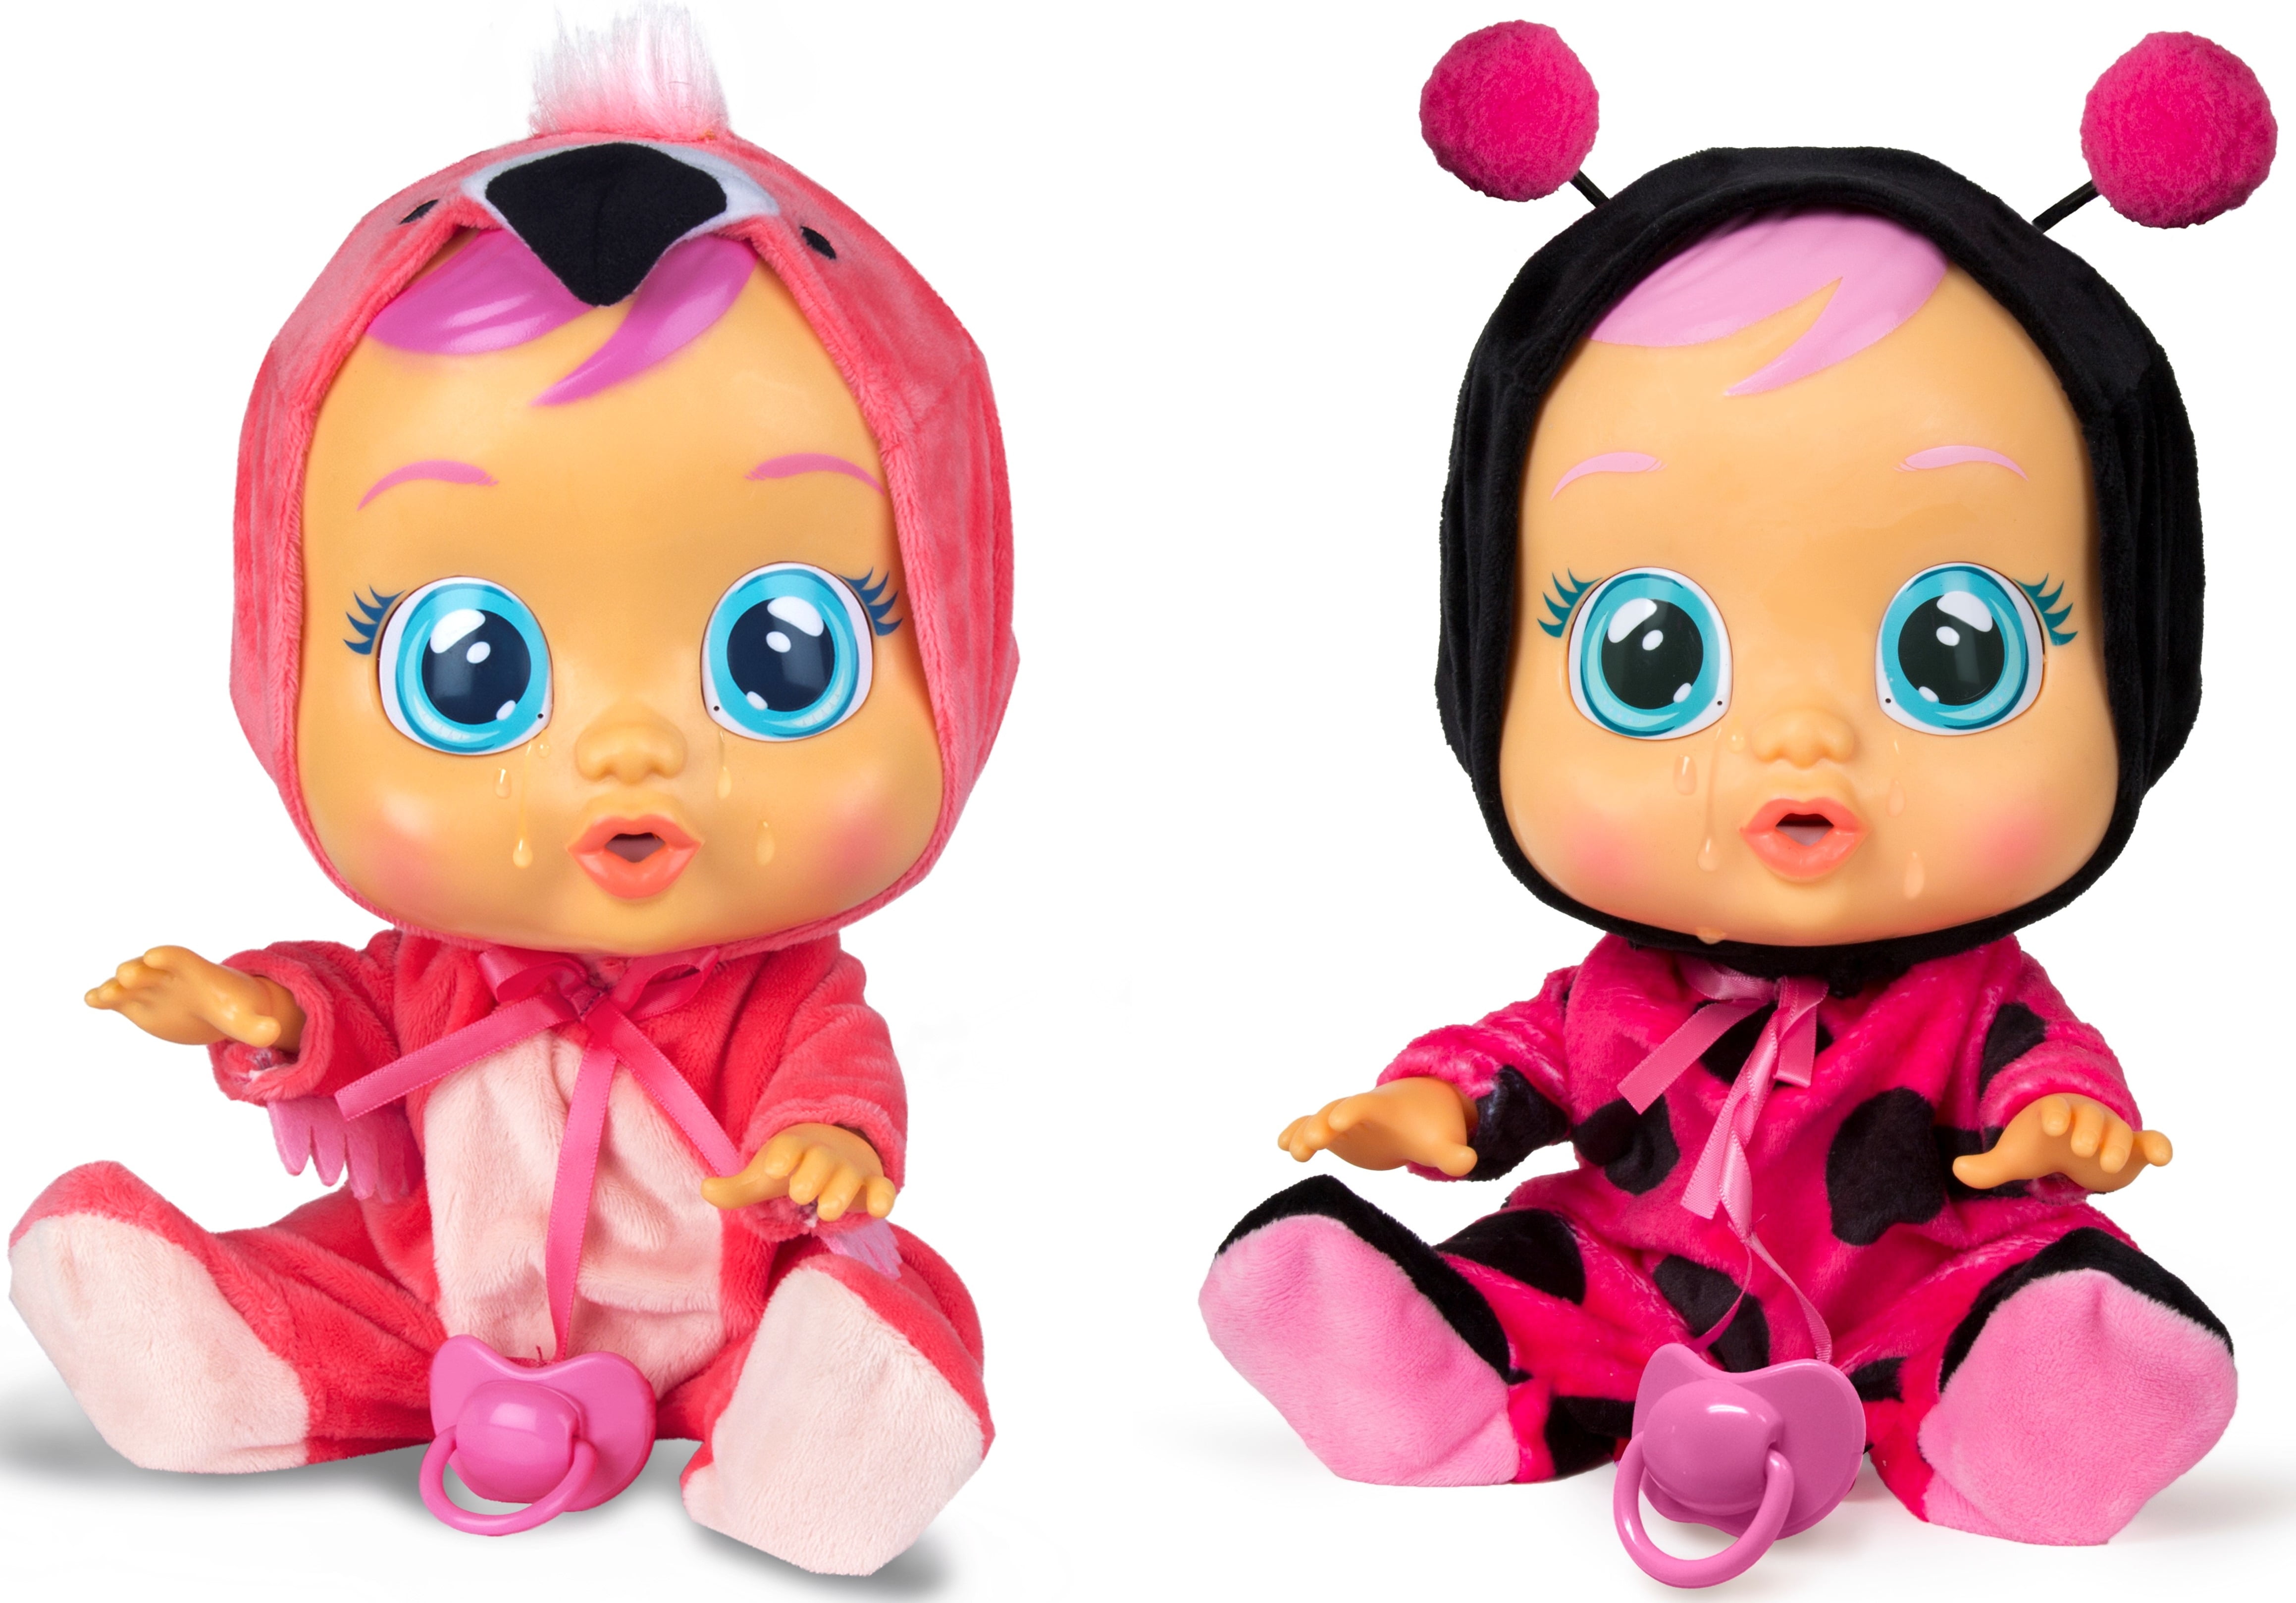 Cry Babies Lady the Ladybug Cries Real Tears Super Cute Brand New 